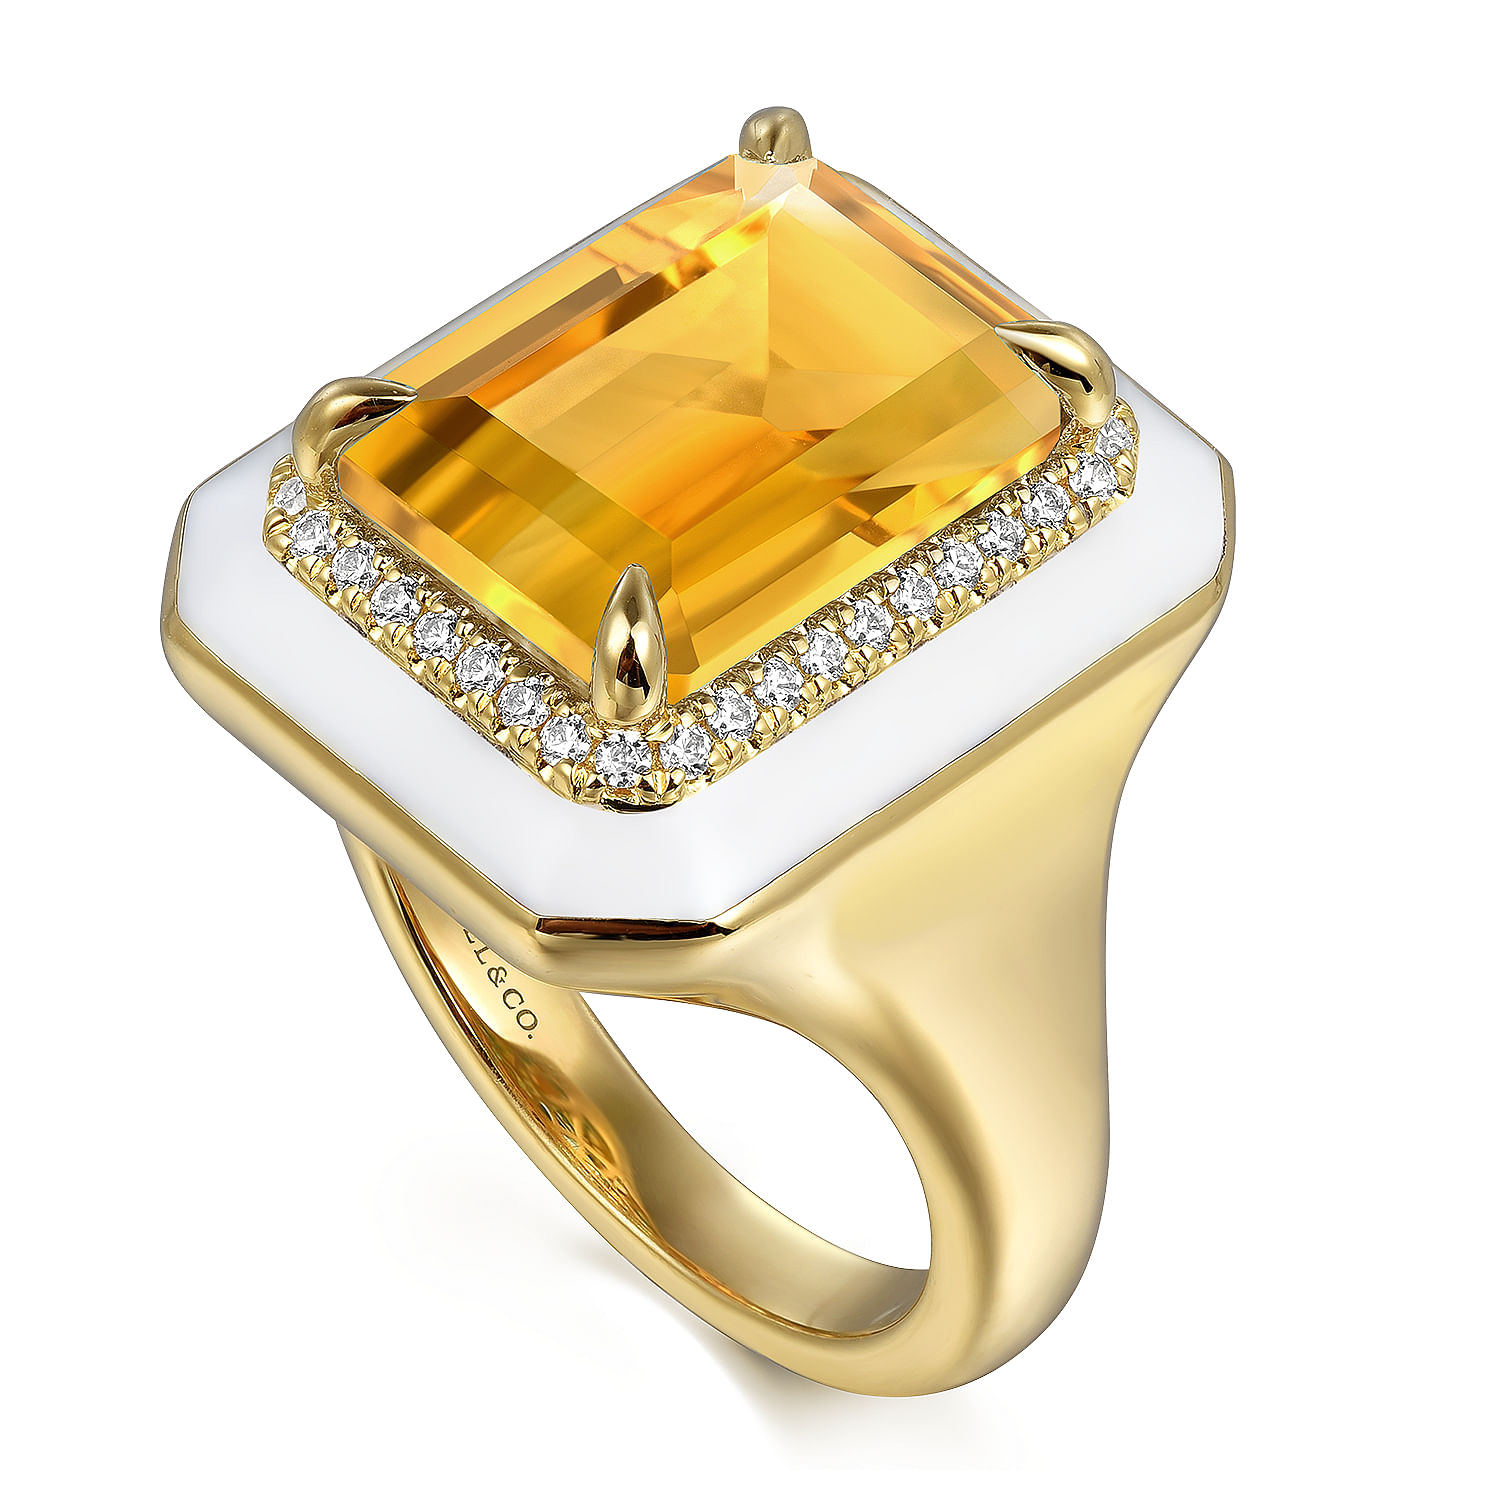 14K Yellow Gold Diamond and Citrine Emerald Cut Ladies Ring With Flower Pattern J-Back and White Enamel